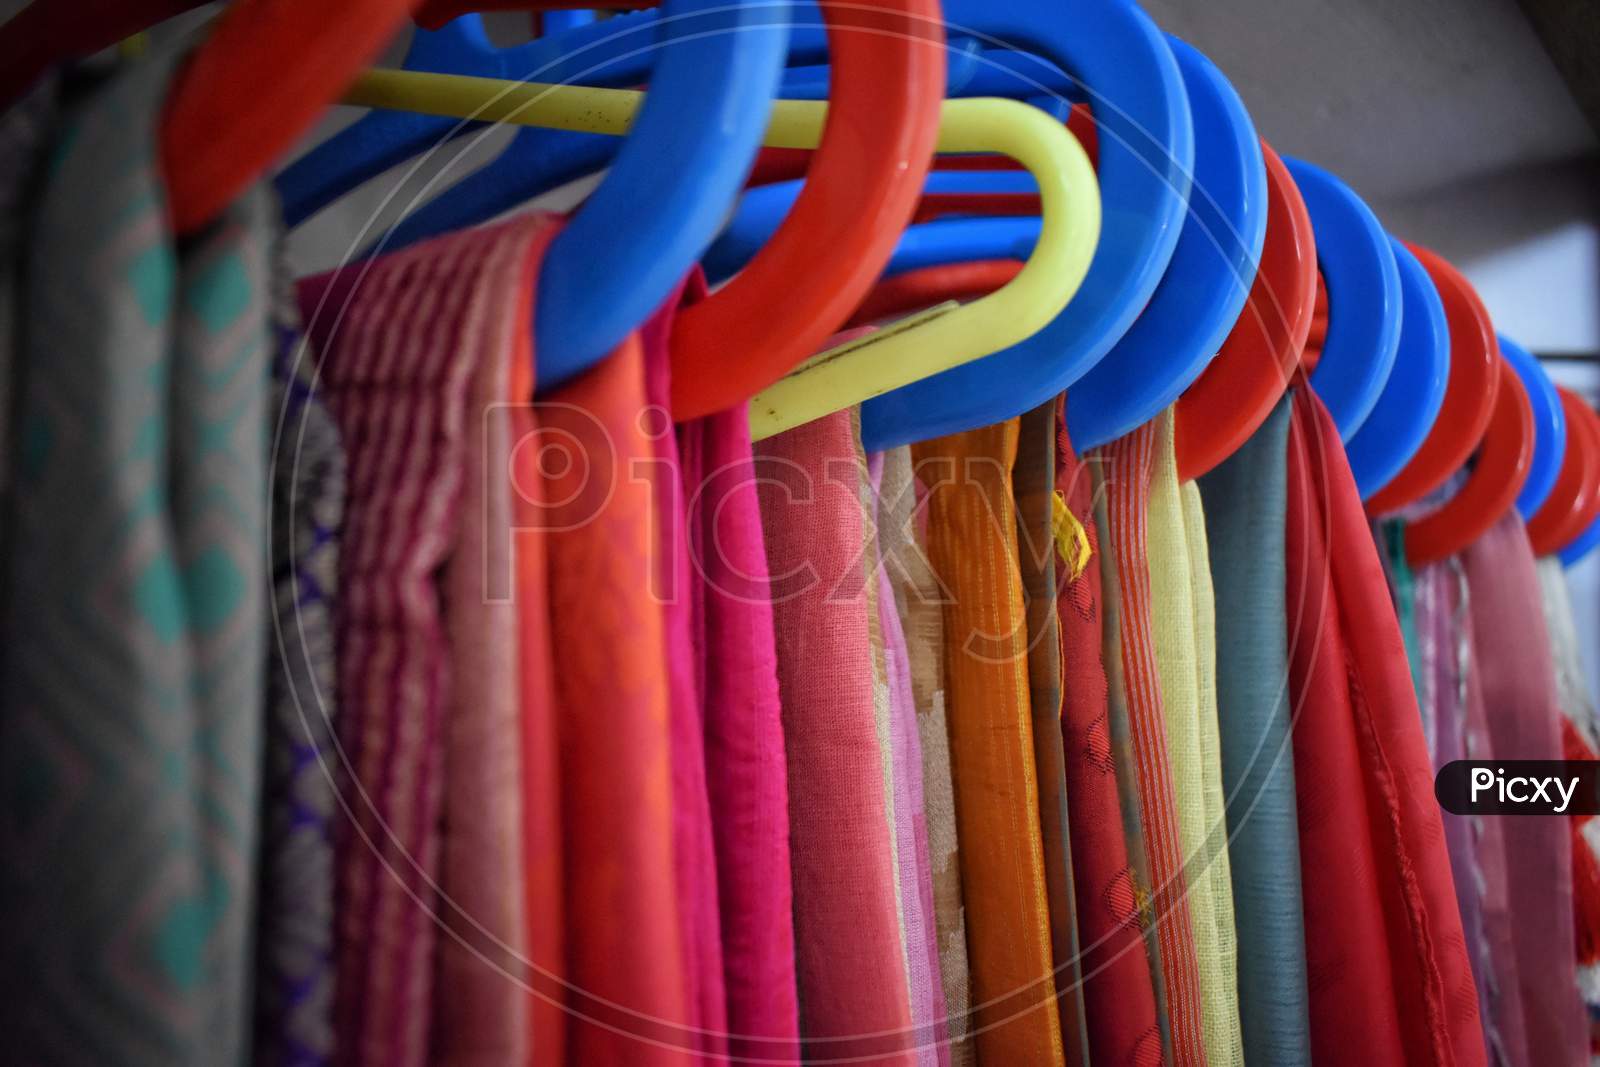 Closeup View Of Saris Or Sarees Hung On Hangers In Display Of Retail Shop,India Culture And Tradition.